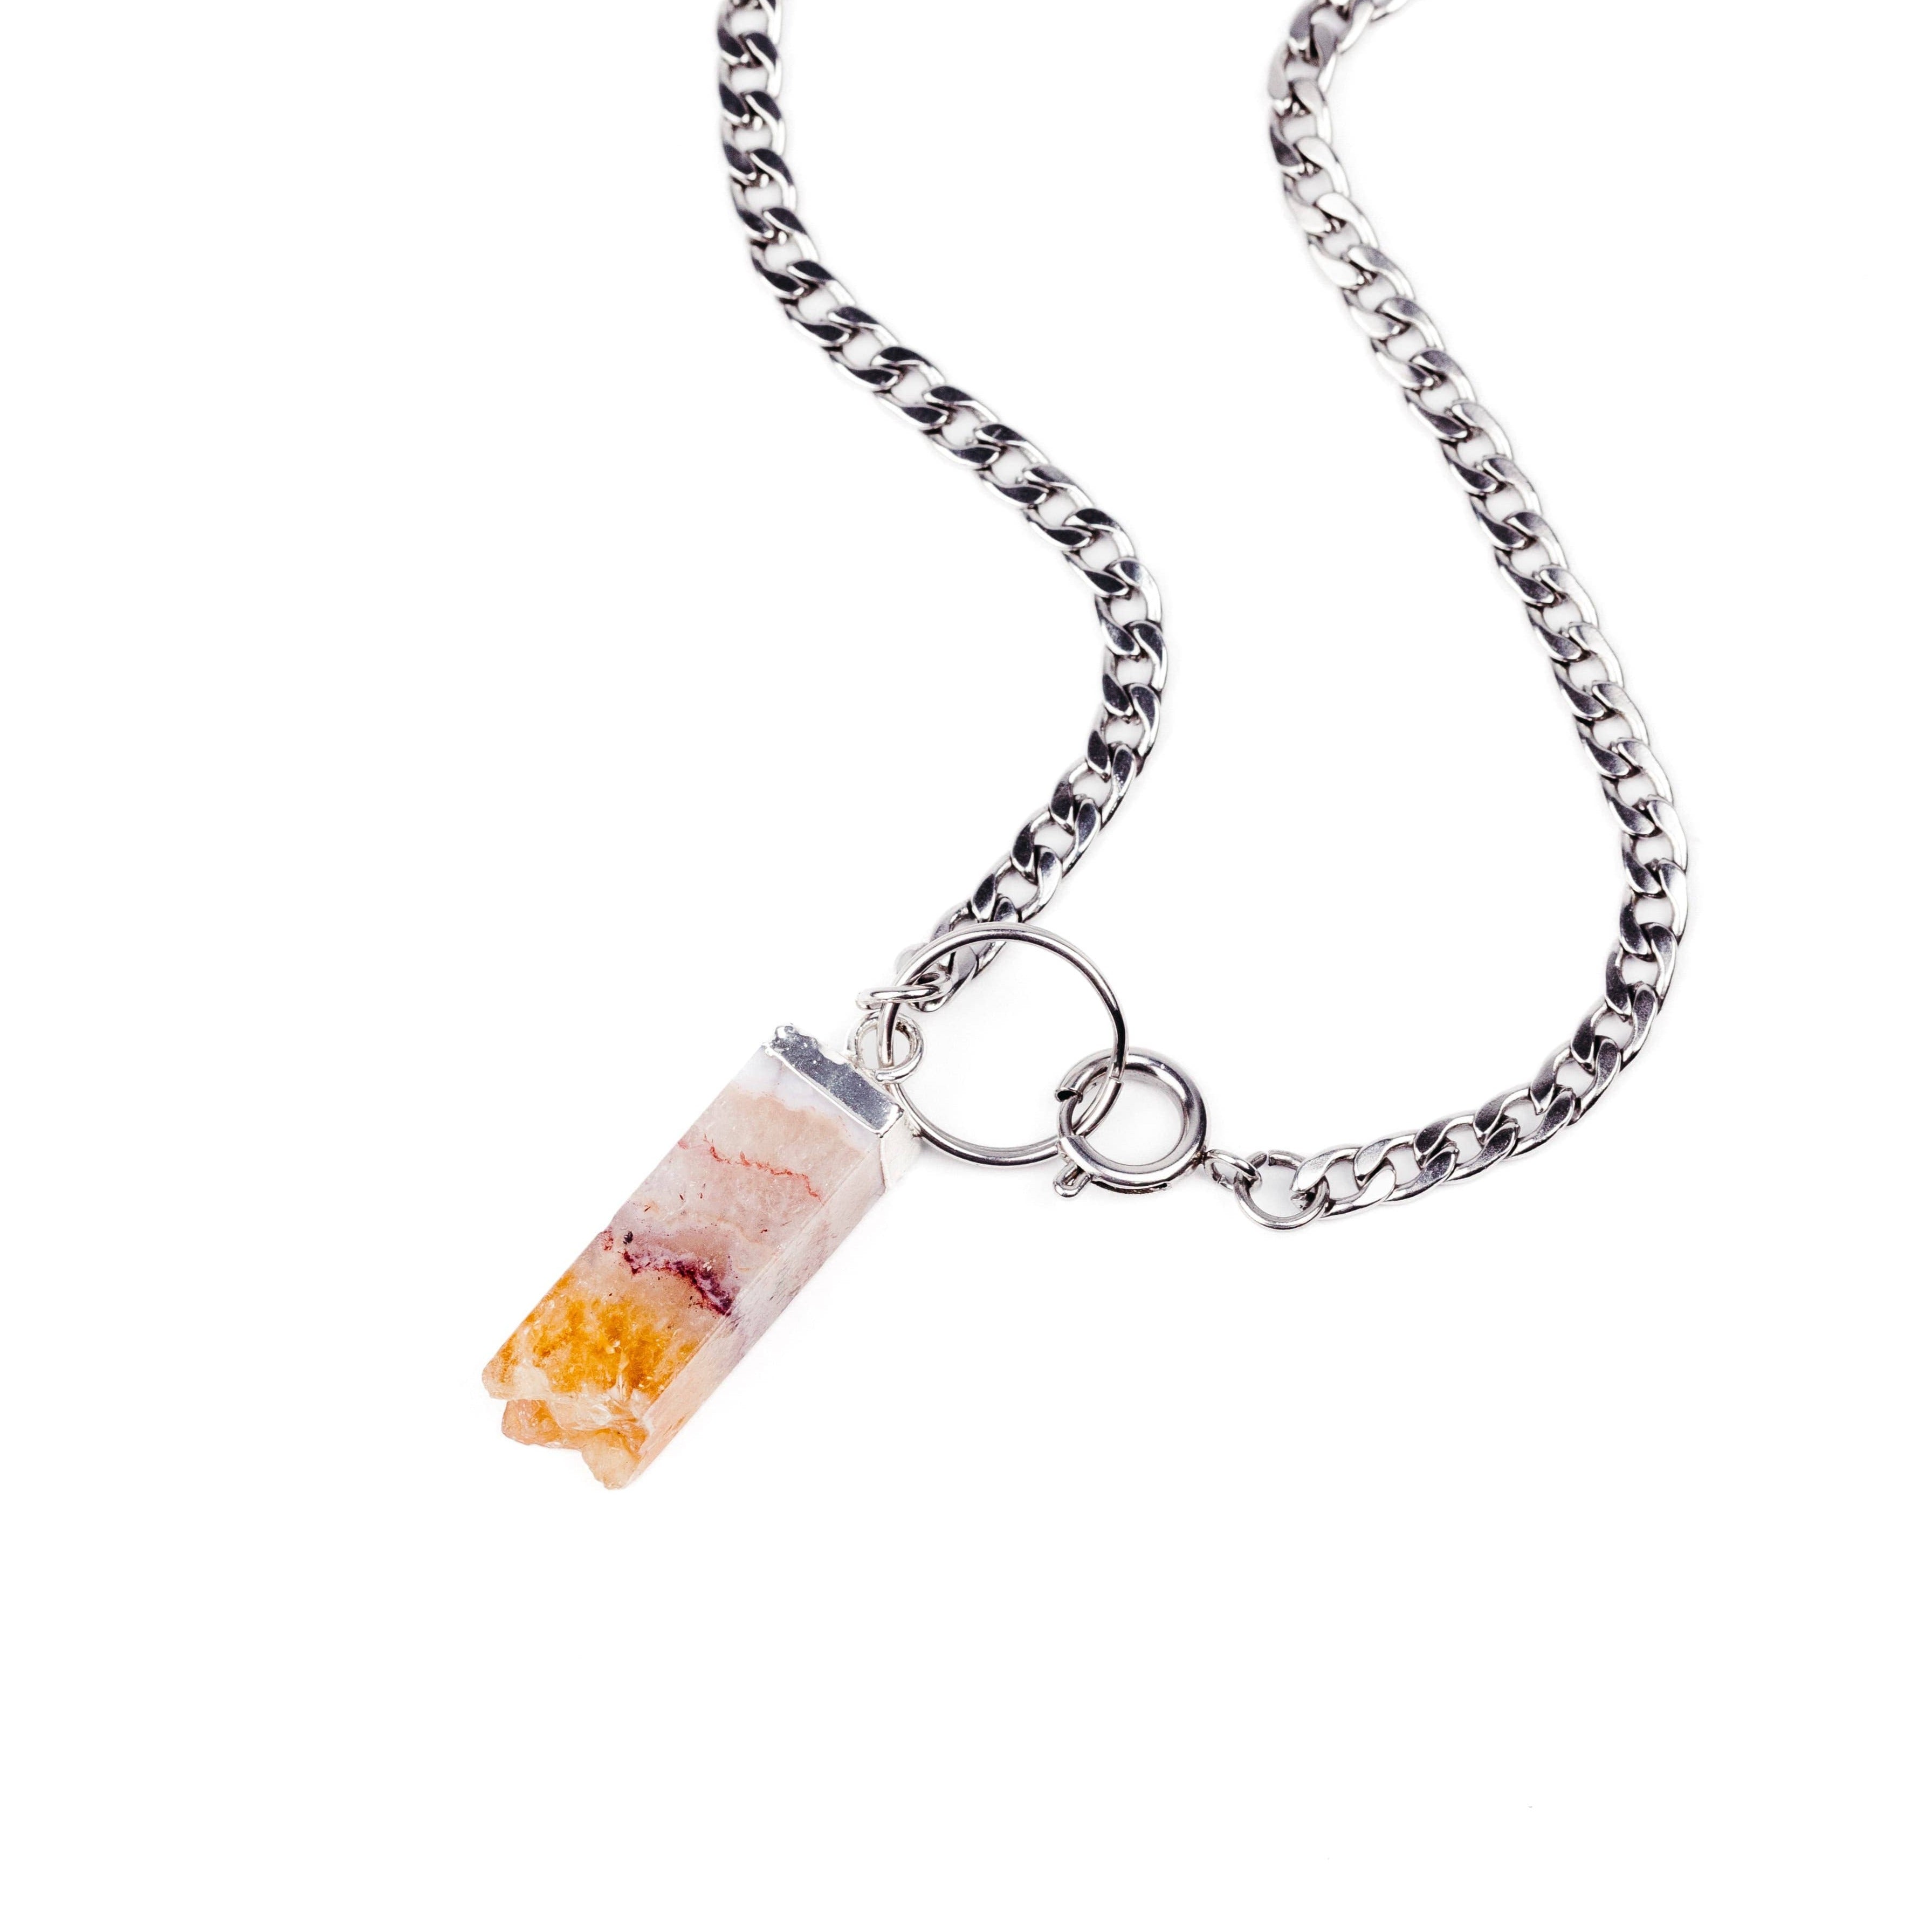 RAW Citrine O Ring Choker Chain Necklace Silver